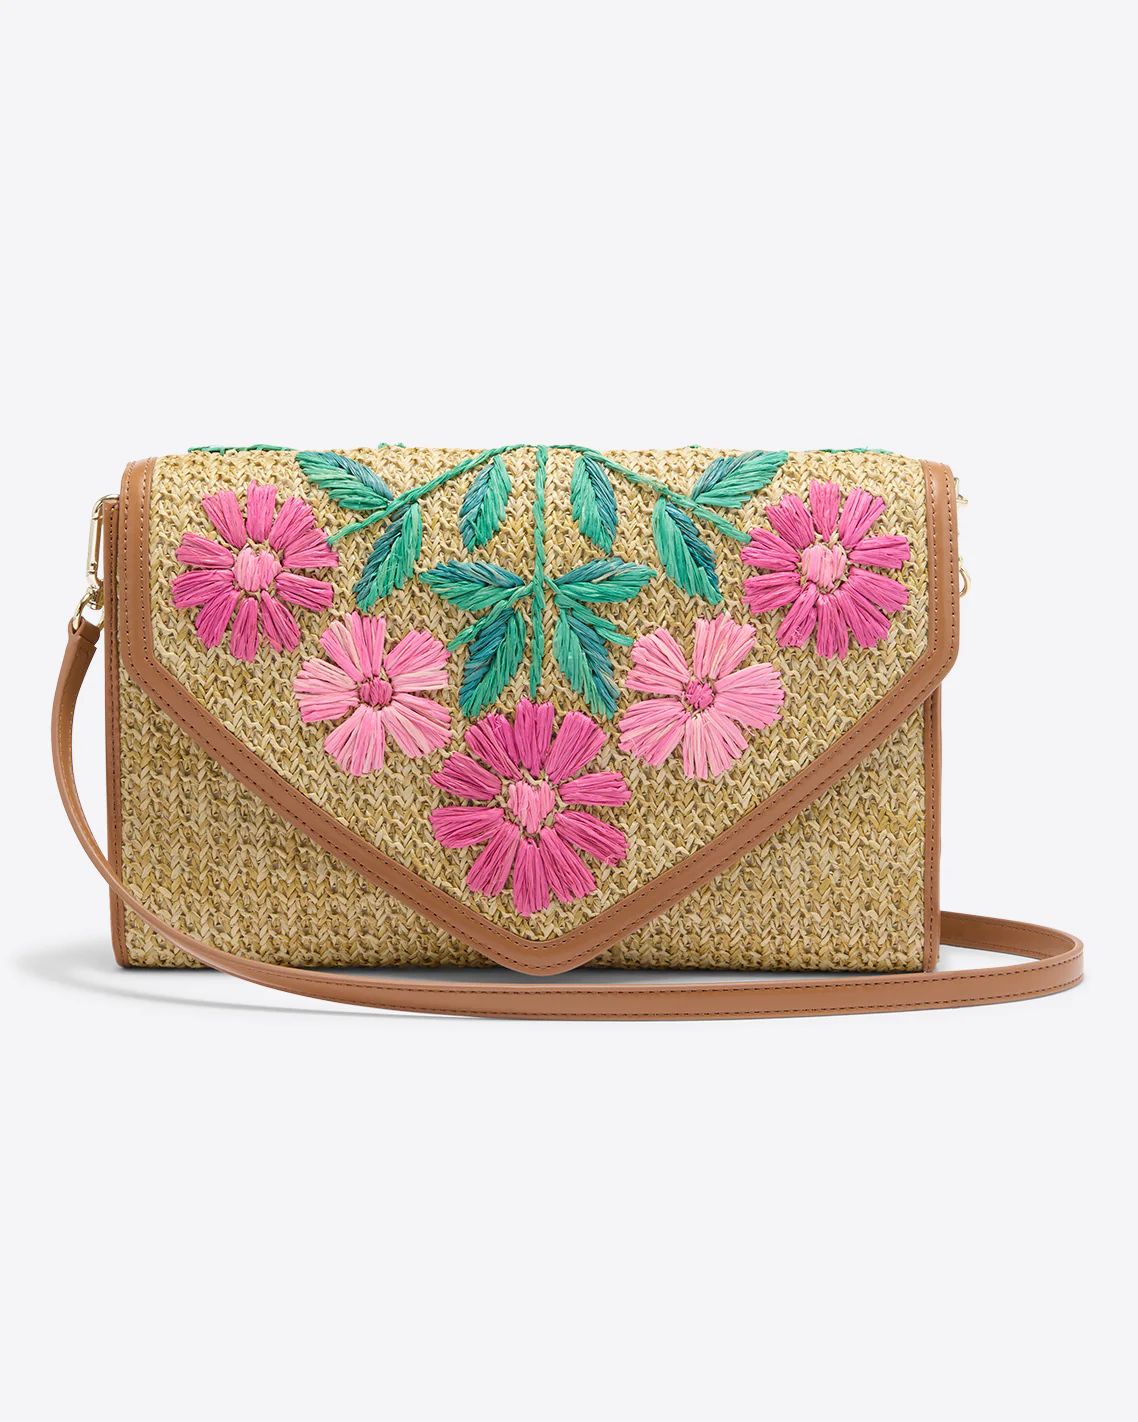 Embroidered Clutch | Draper James (US)